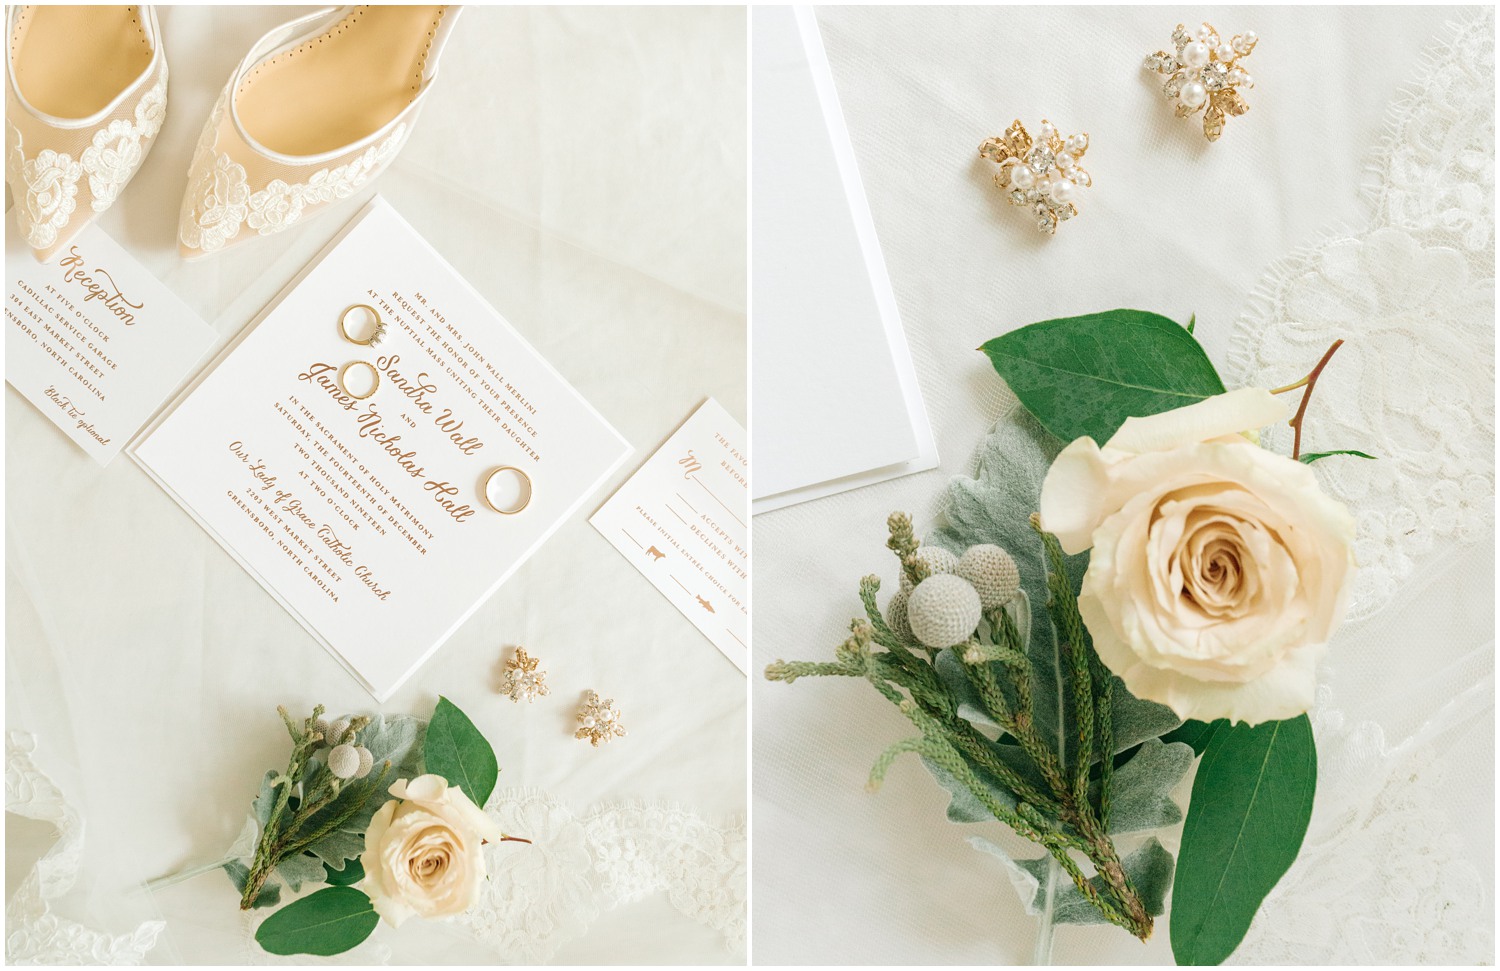 Chelsea Renay Photography photographs ivory and gold wedding details